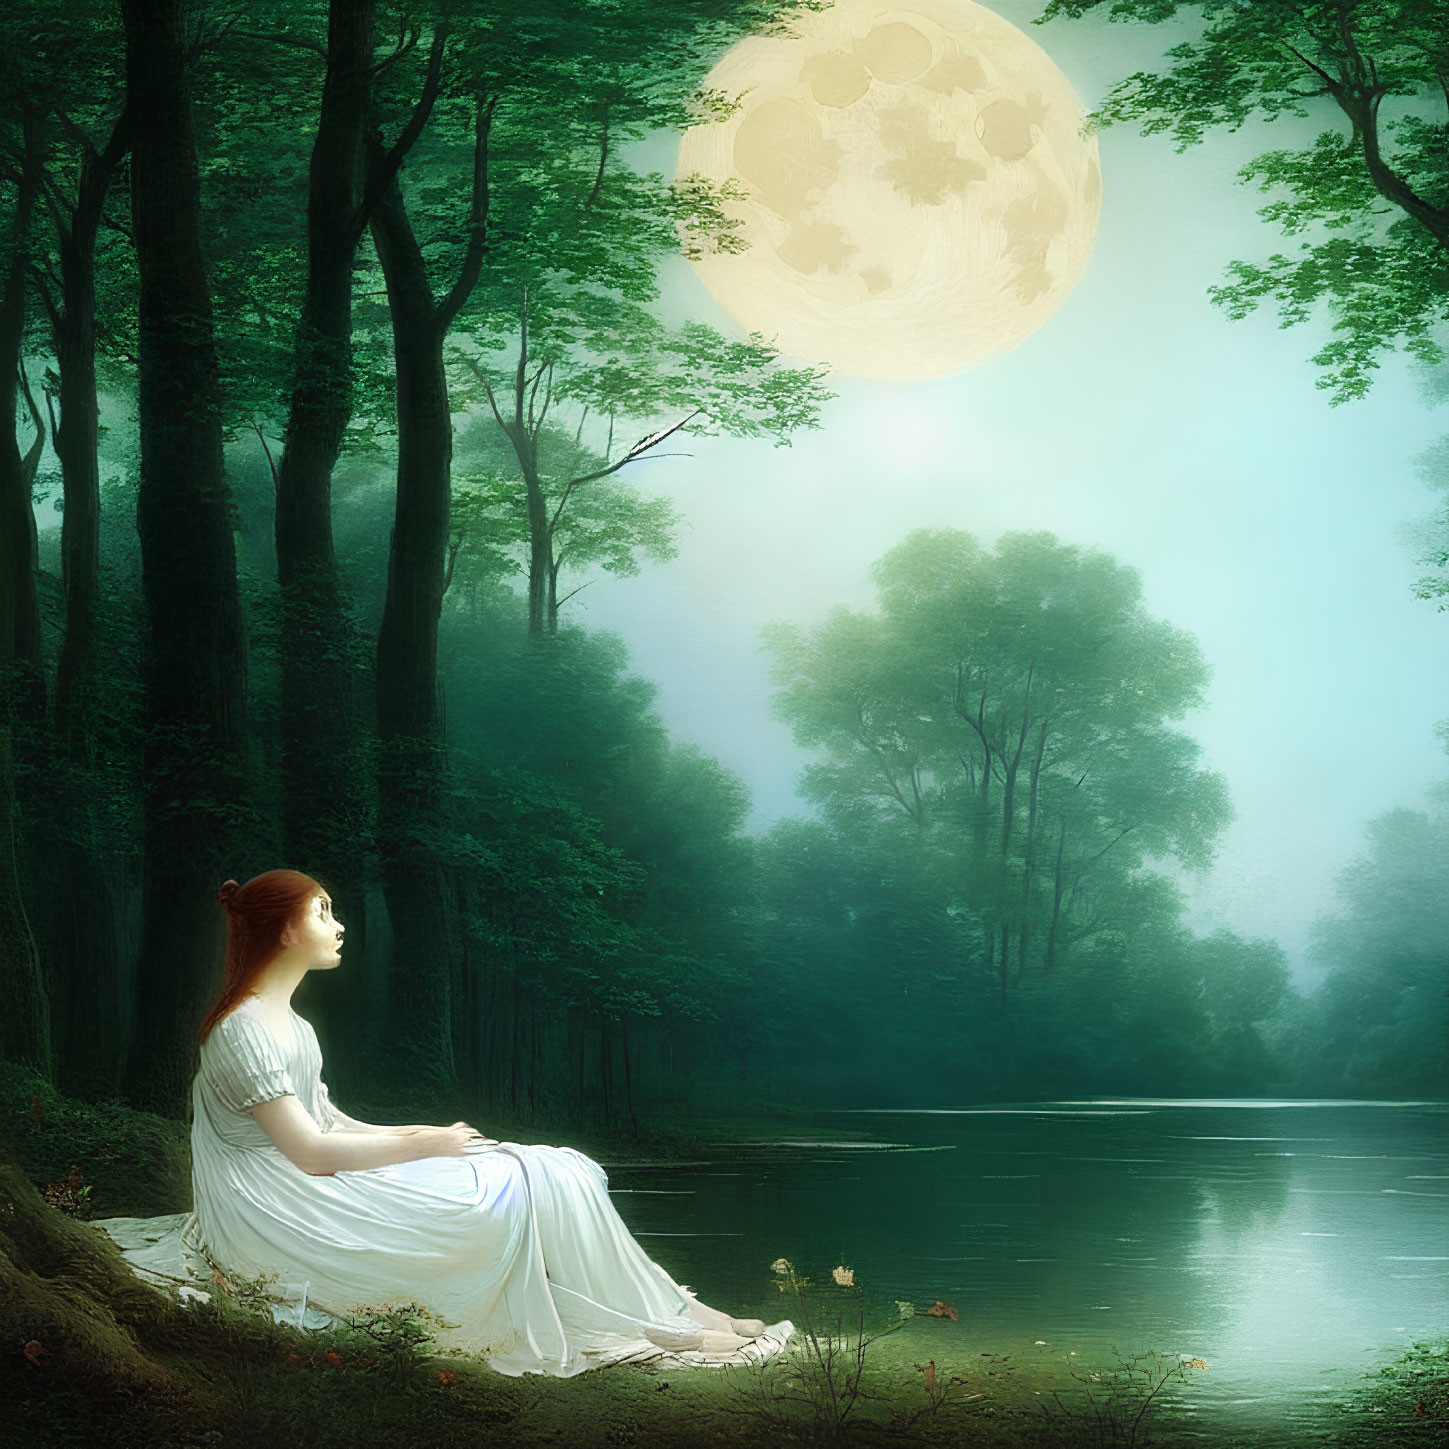 Woman in White Dress Contemplating by Misty Forest Lake